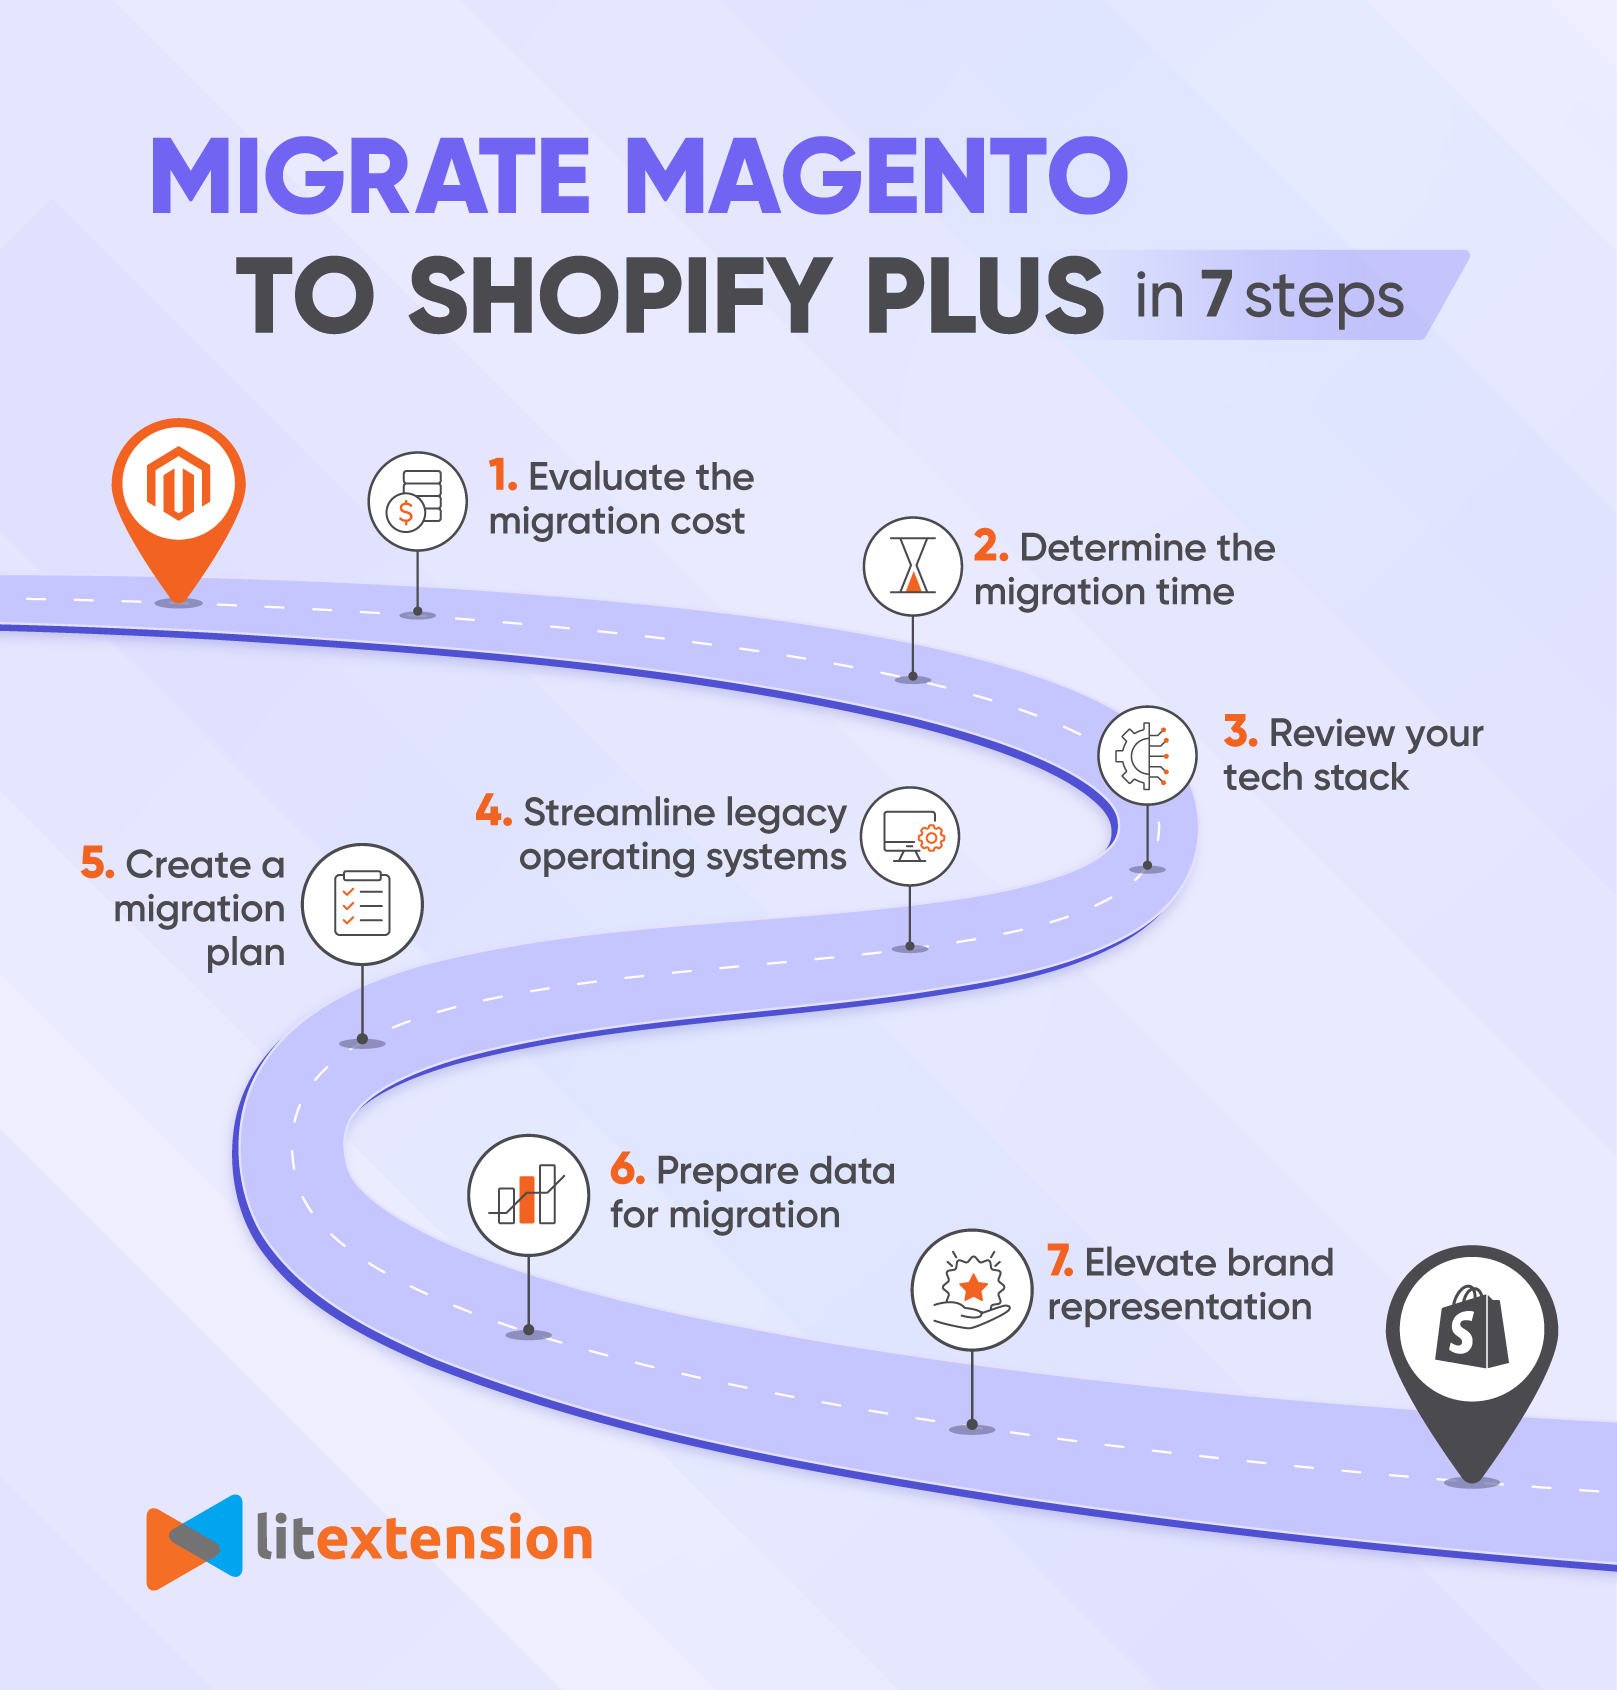 Magento to Shopify Plus guide in 7 steps